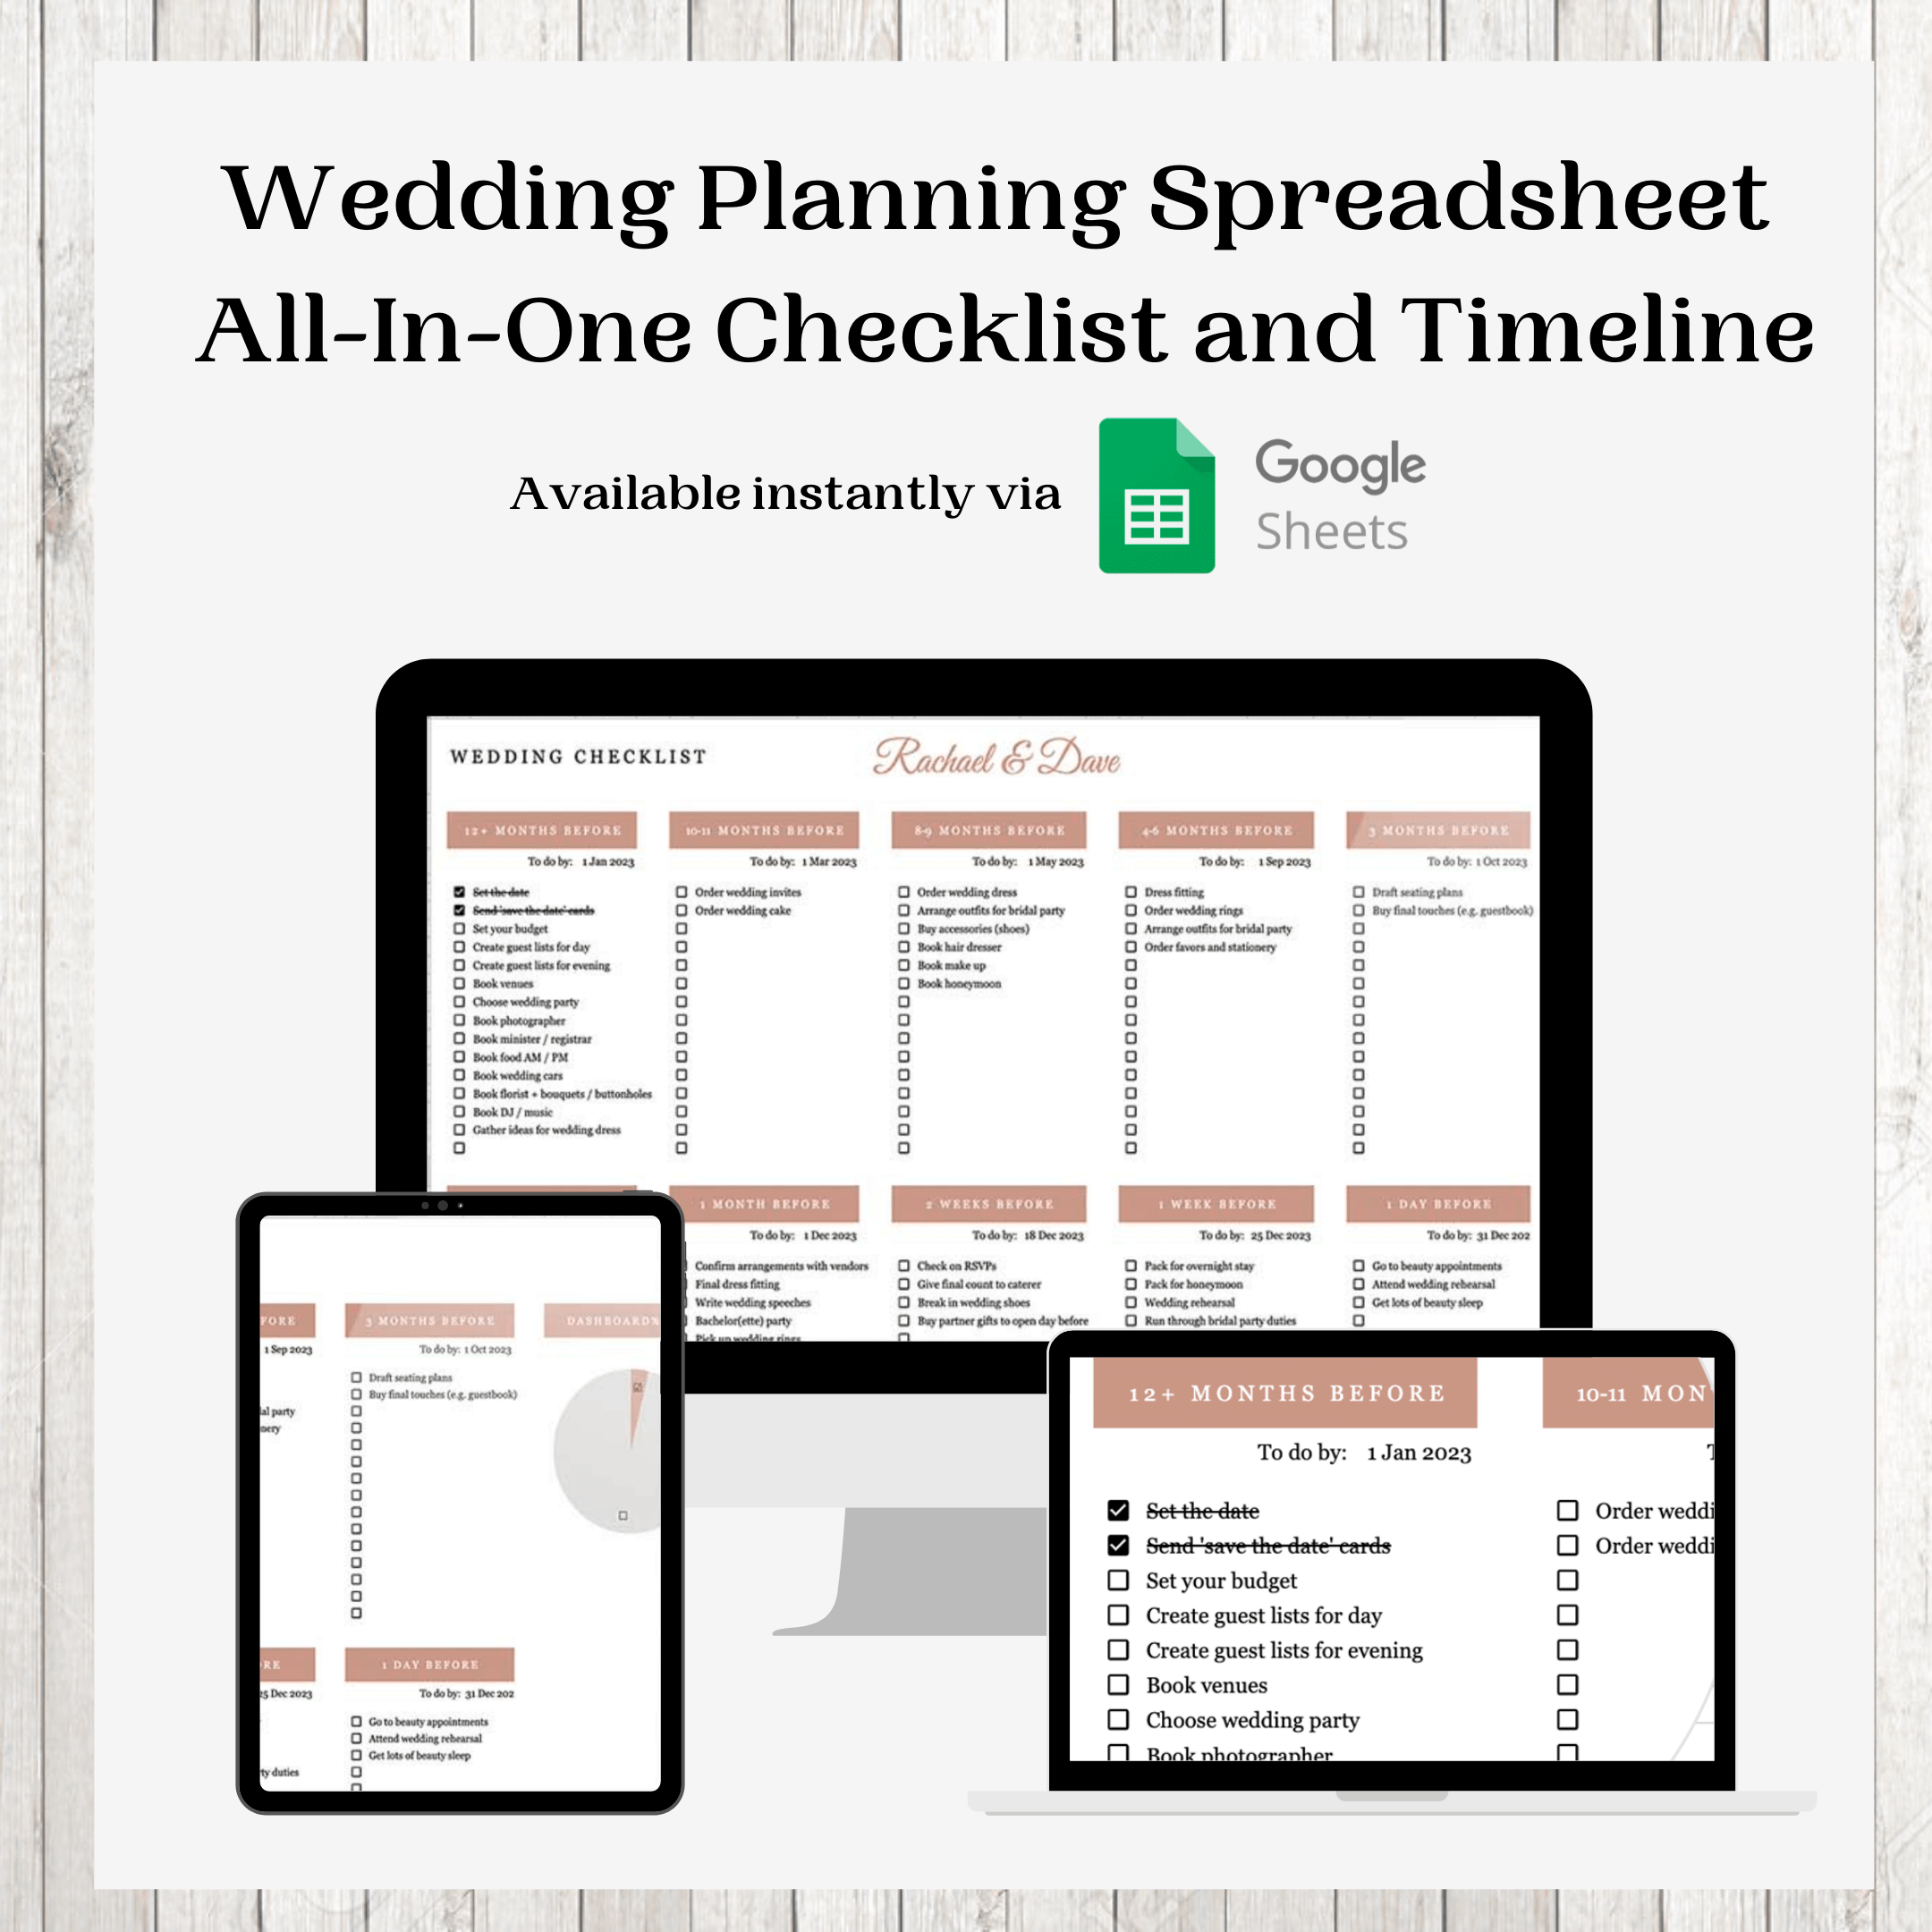 feww wedding planning printables and expense tracker